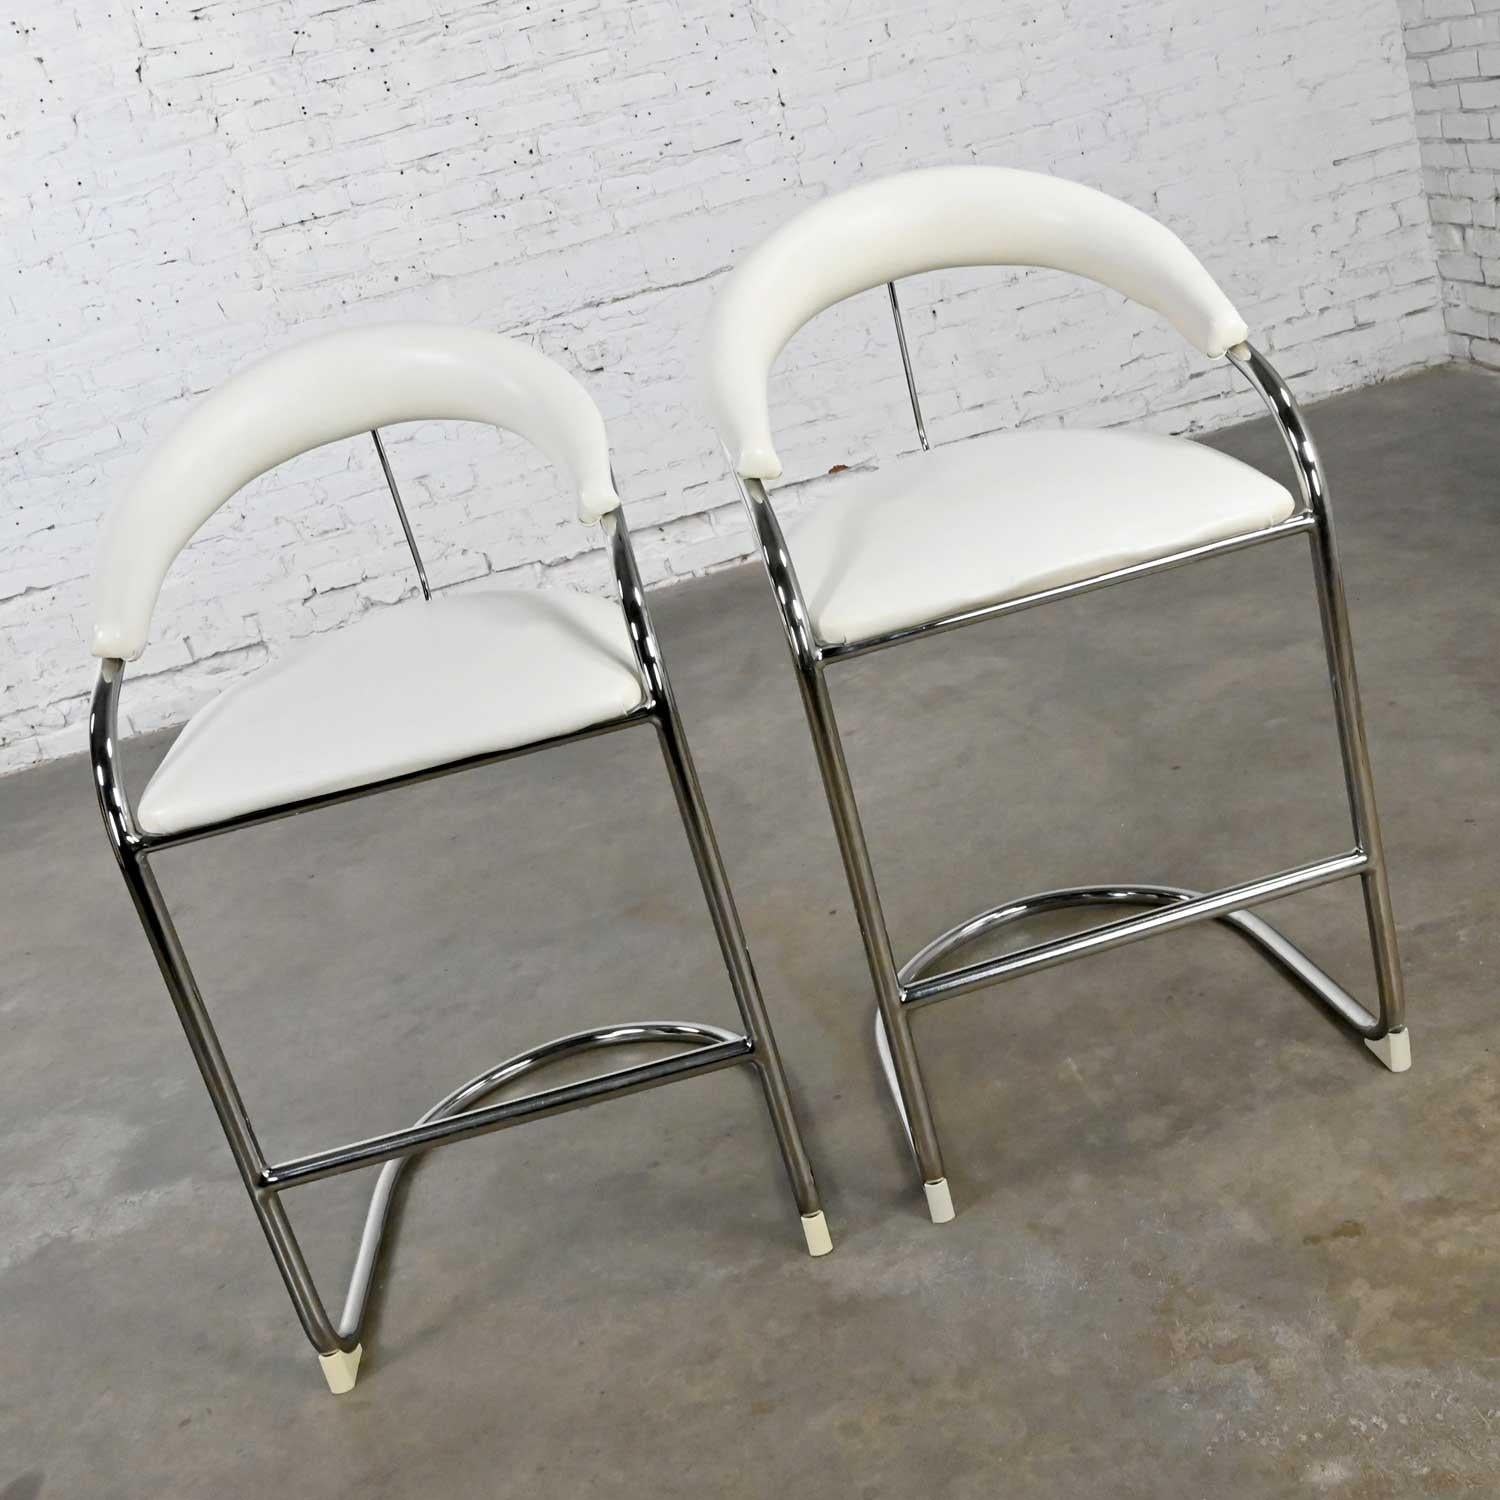 Fabulous vintage white vinyl & chrome tube pair of barstools by Thonet in the style of the Model SS33 Bauhaus cantilever chair by Anton Lorenz. Beautiful condition, keeping in mind that these are vintage and not new so will have signs of use and